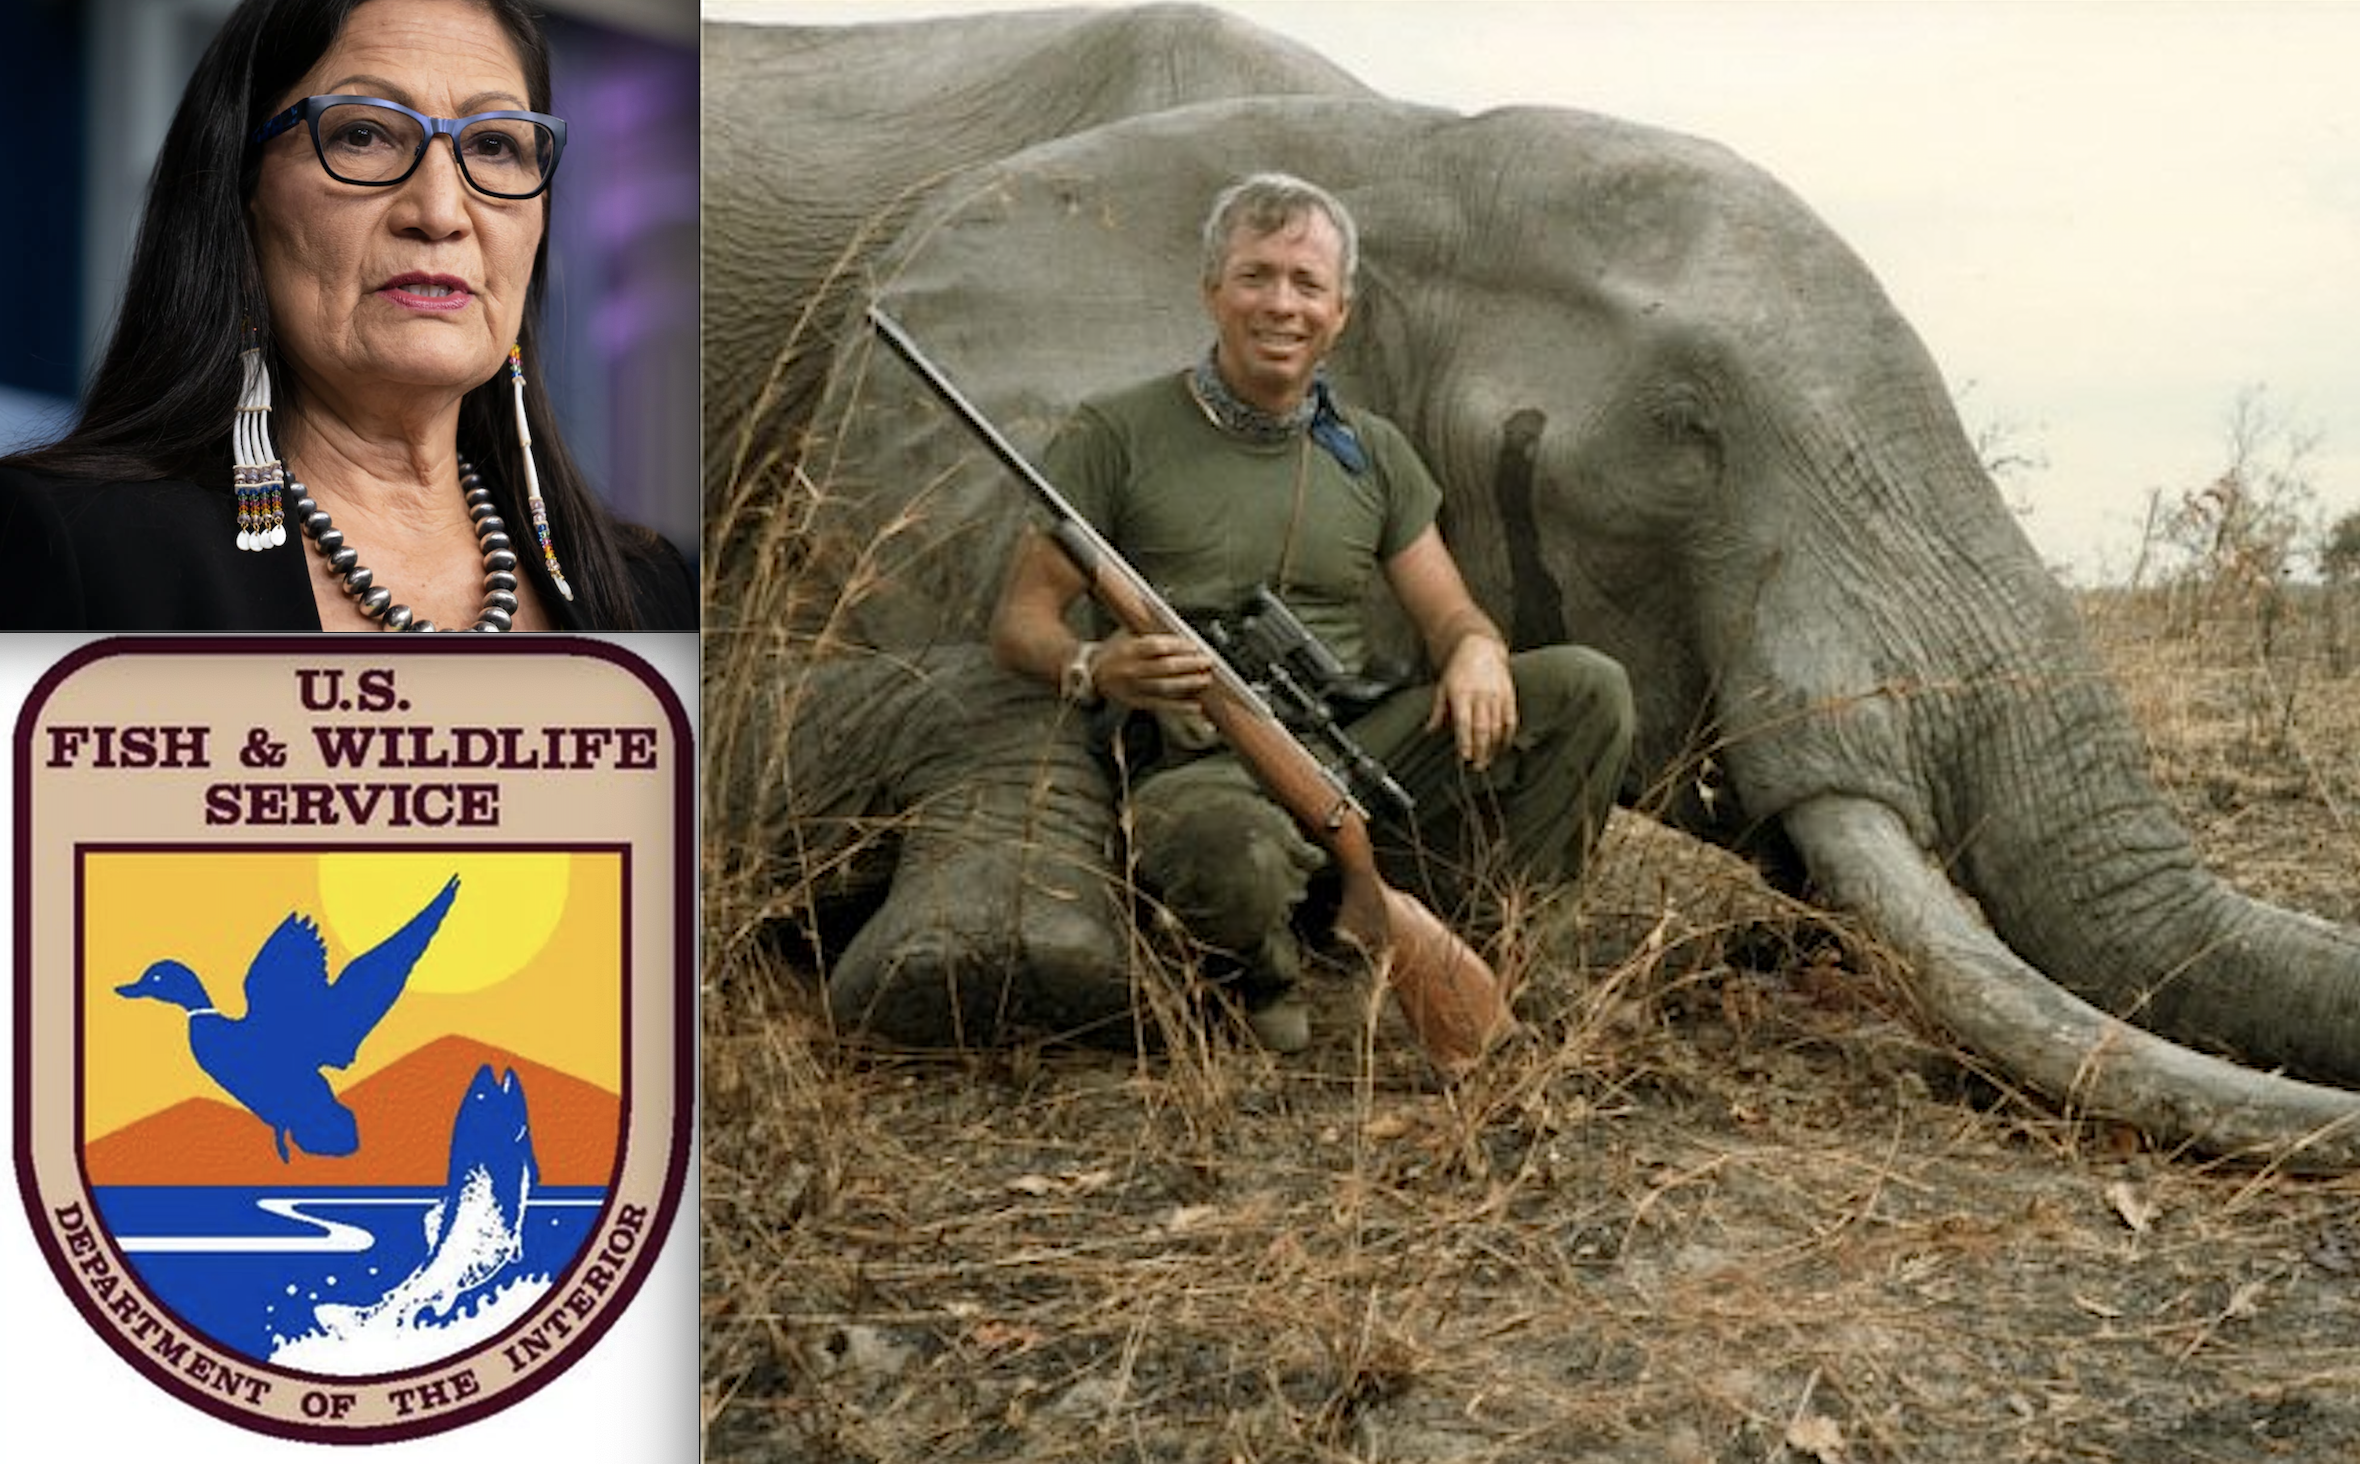 USFWS Issues 6 Elephant Trophy Permits; EnviroNews Asks Why; Interior Dept. Answers, Stonewalls Tough Questions